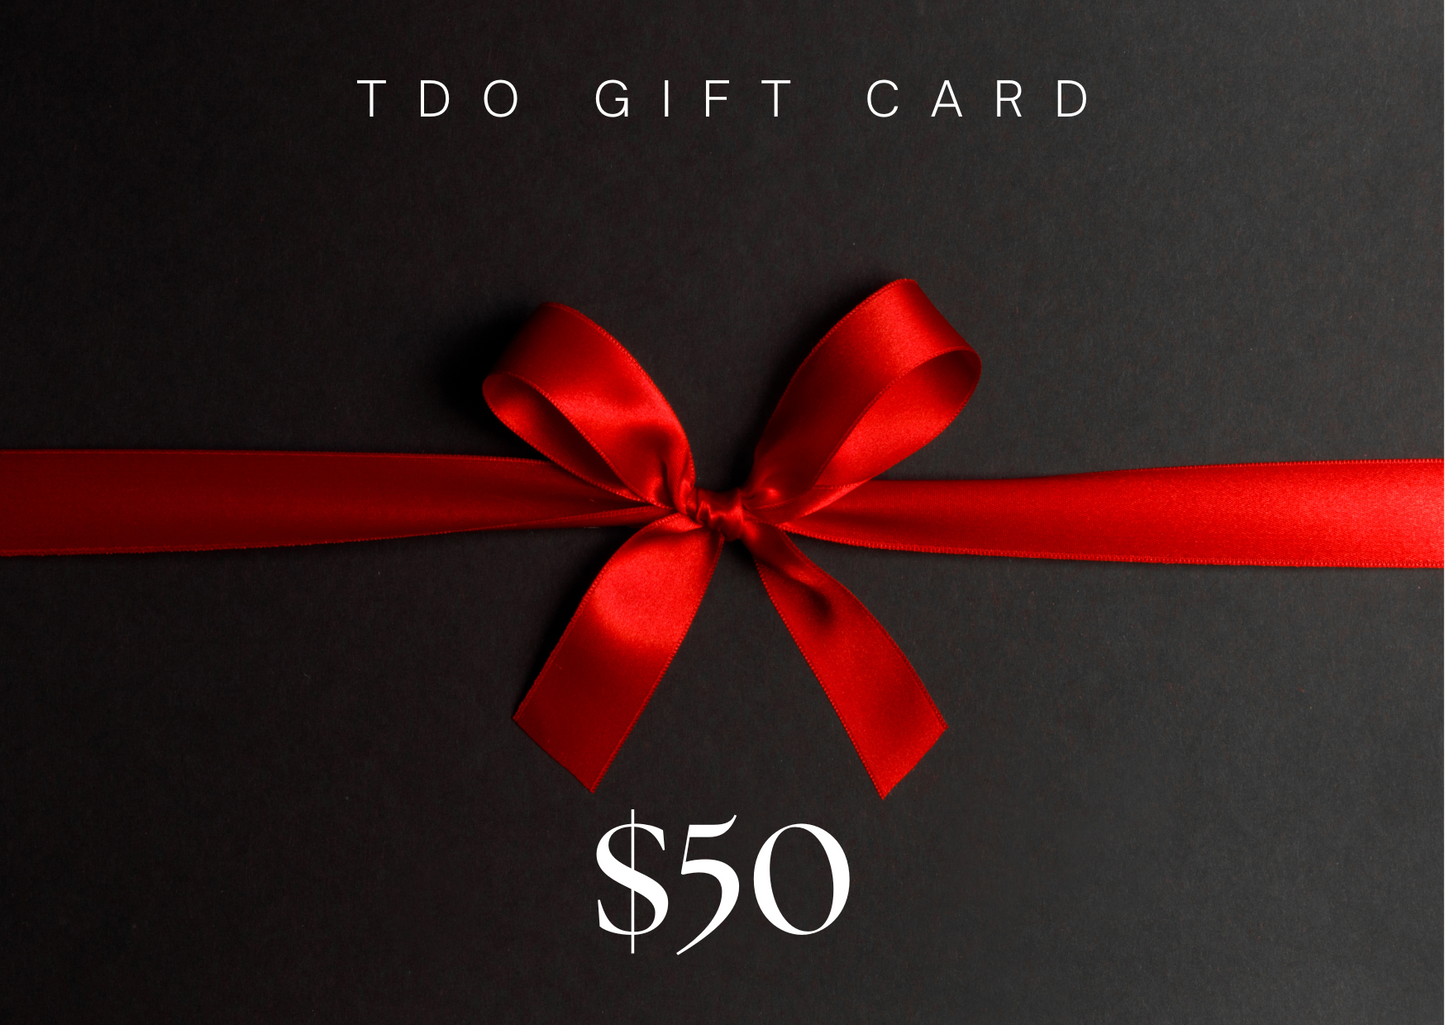 The Dress Outlet Gift Card